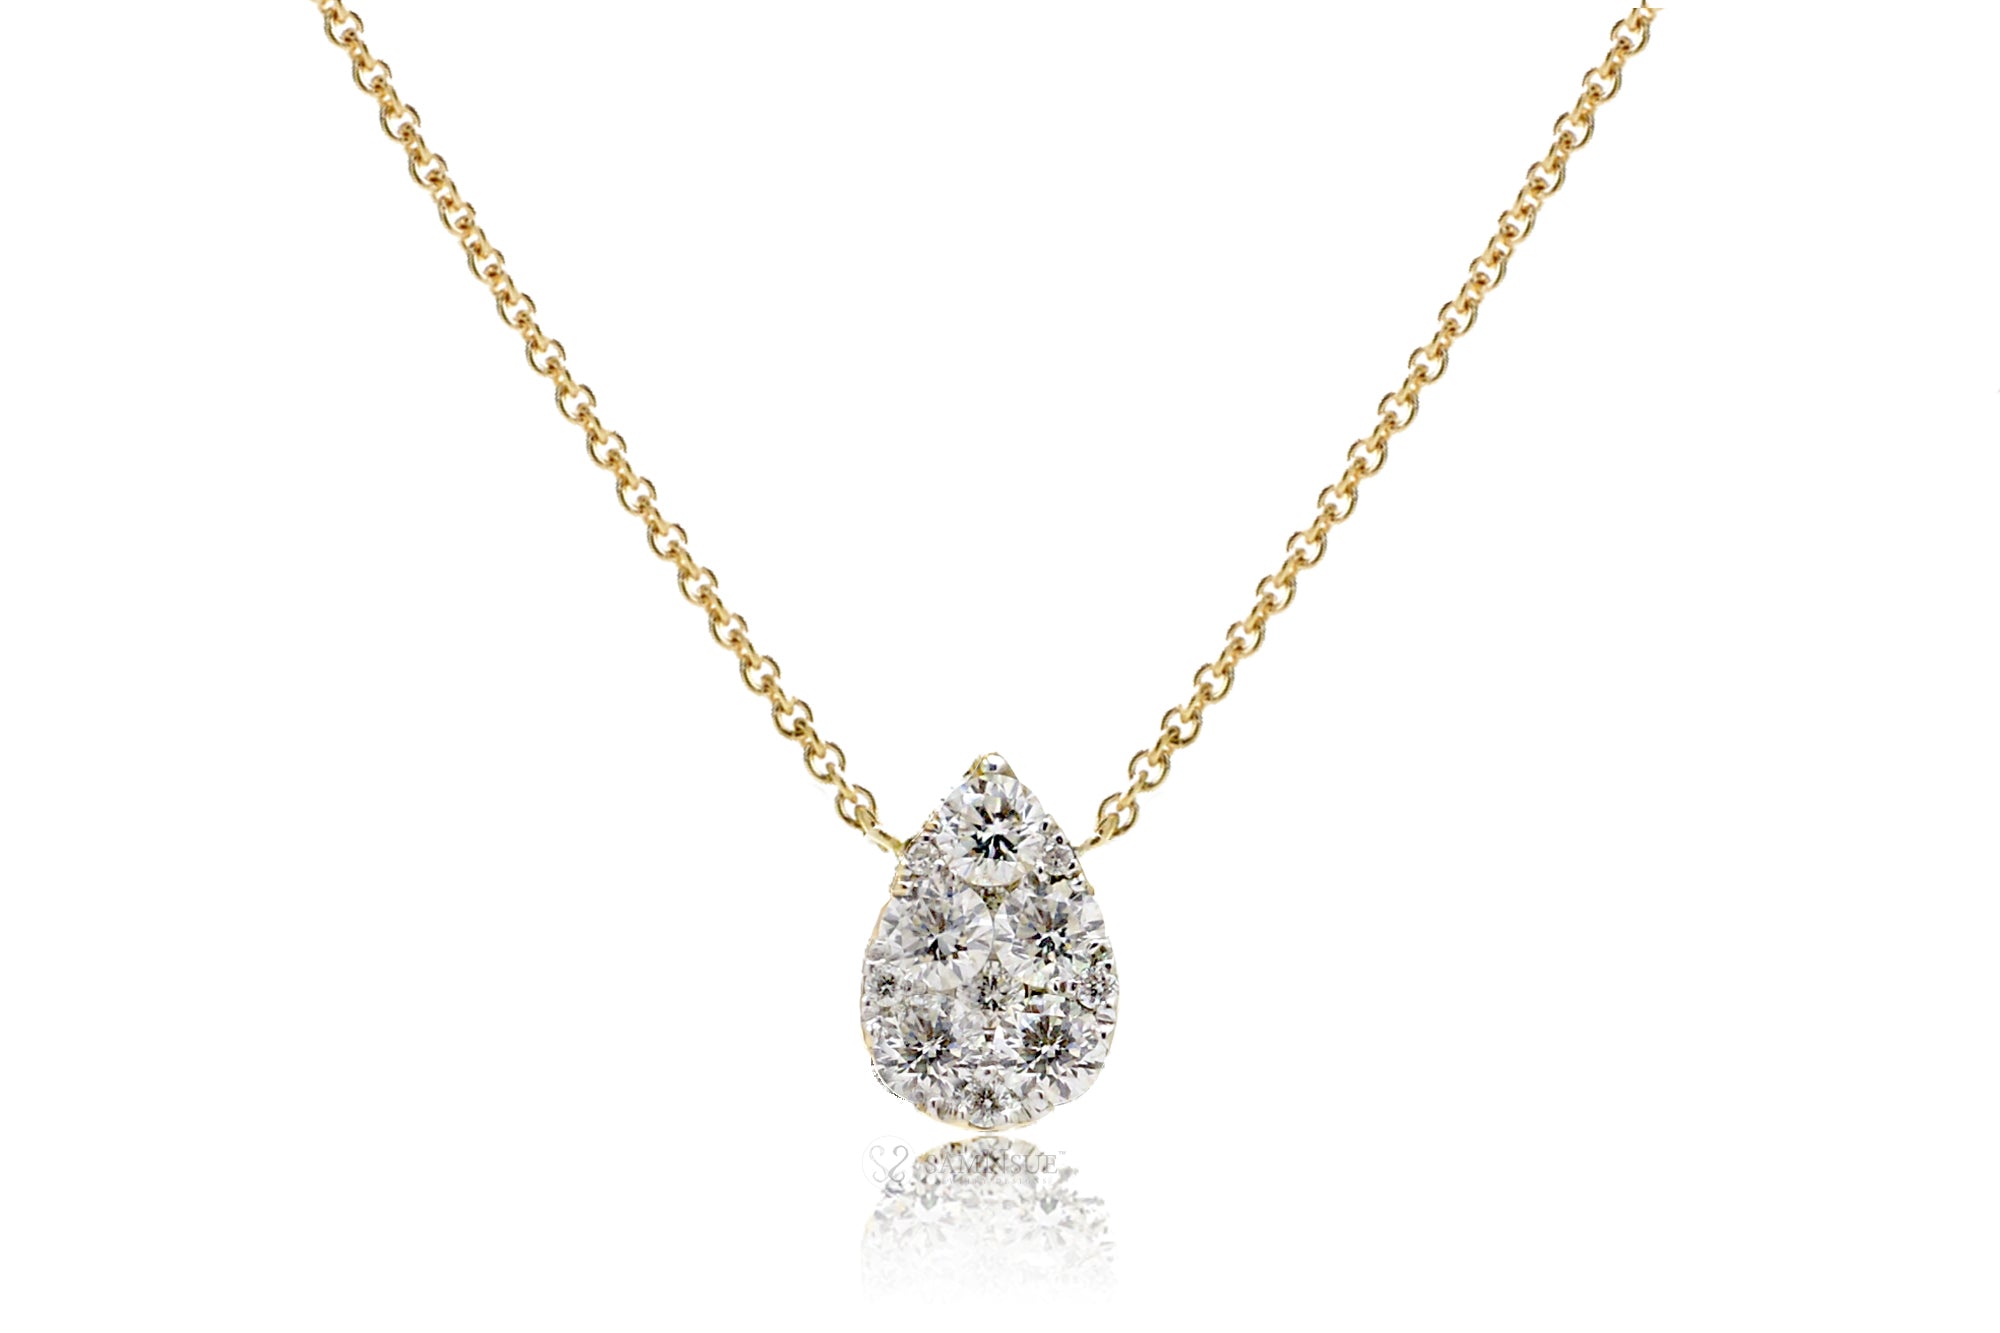 Pear shape cluster diamond pendant - solitaire tear drop diamond necklace in yellow gold